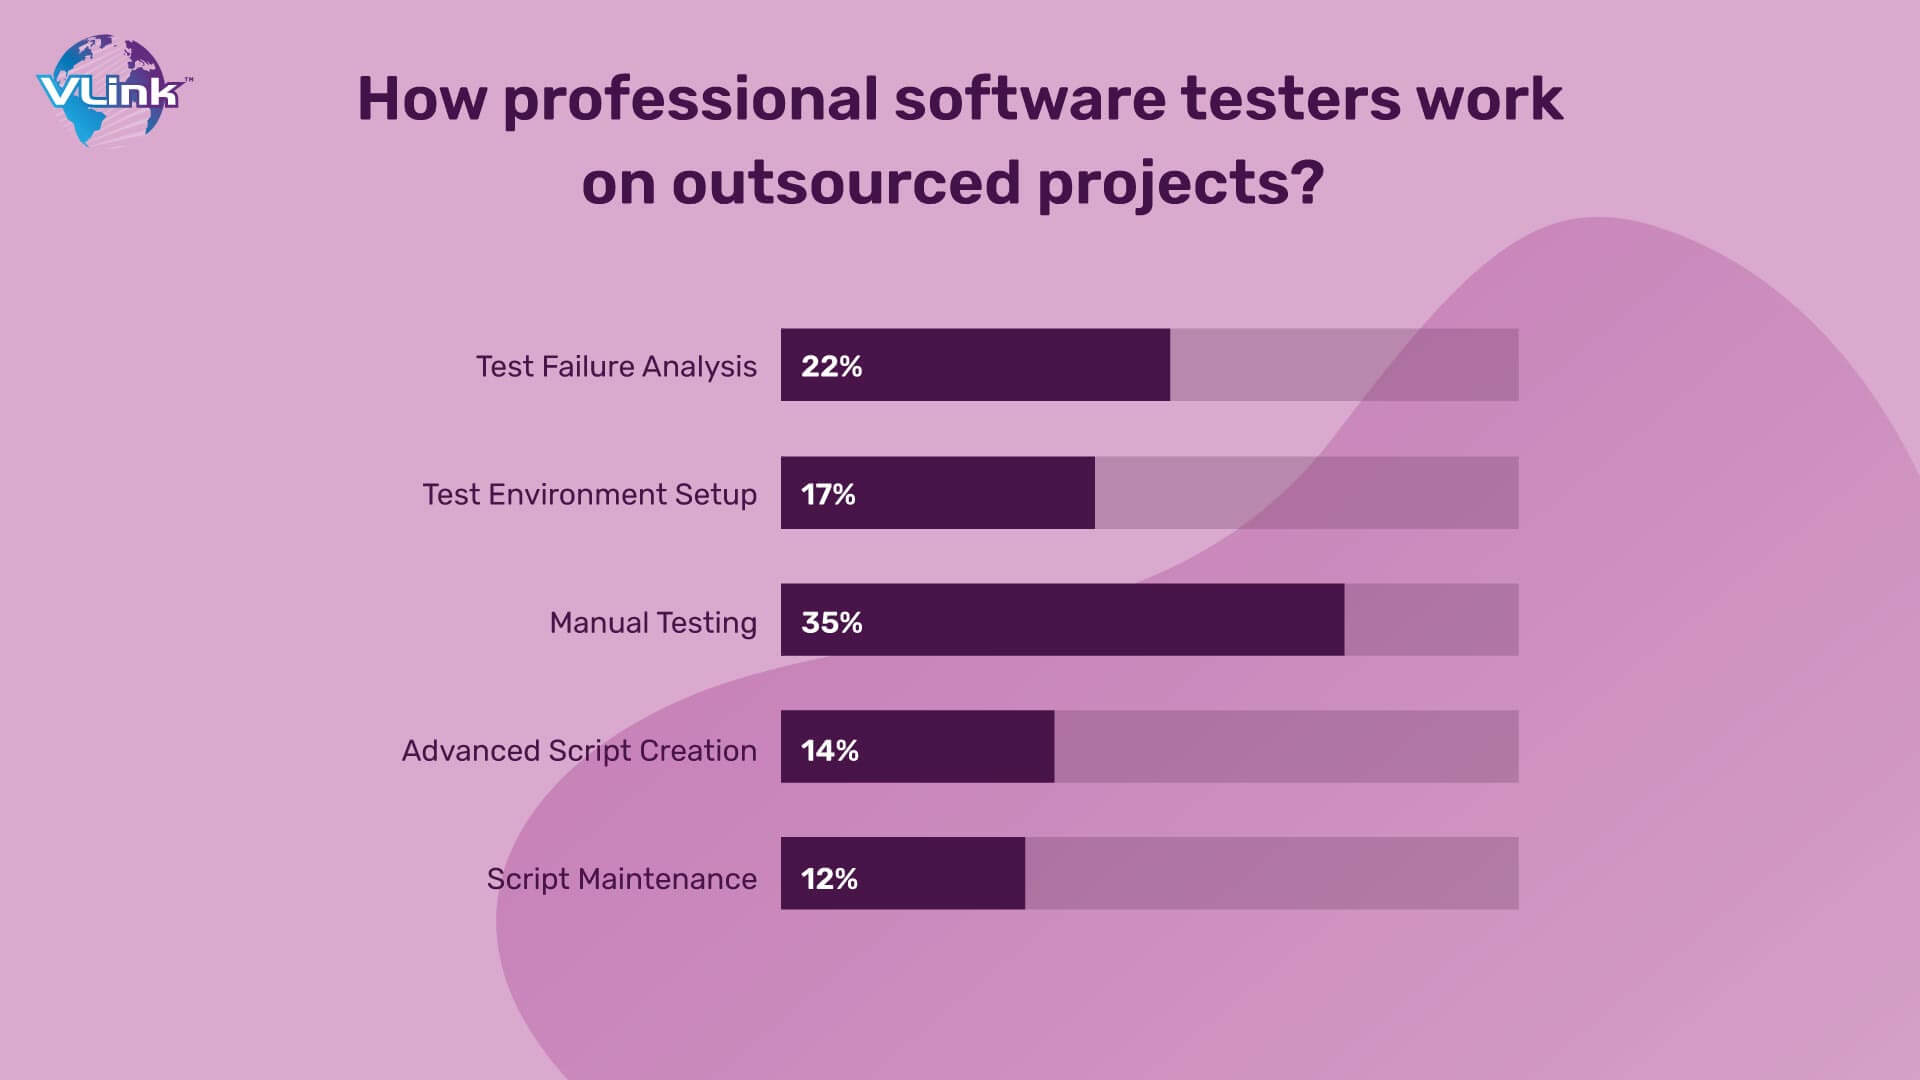 How professional software testers work on outsourced projects